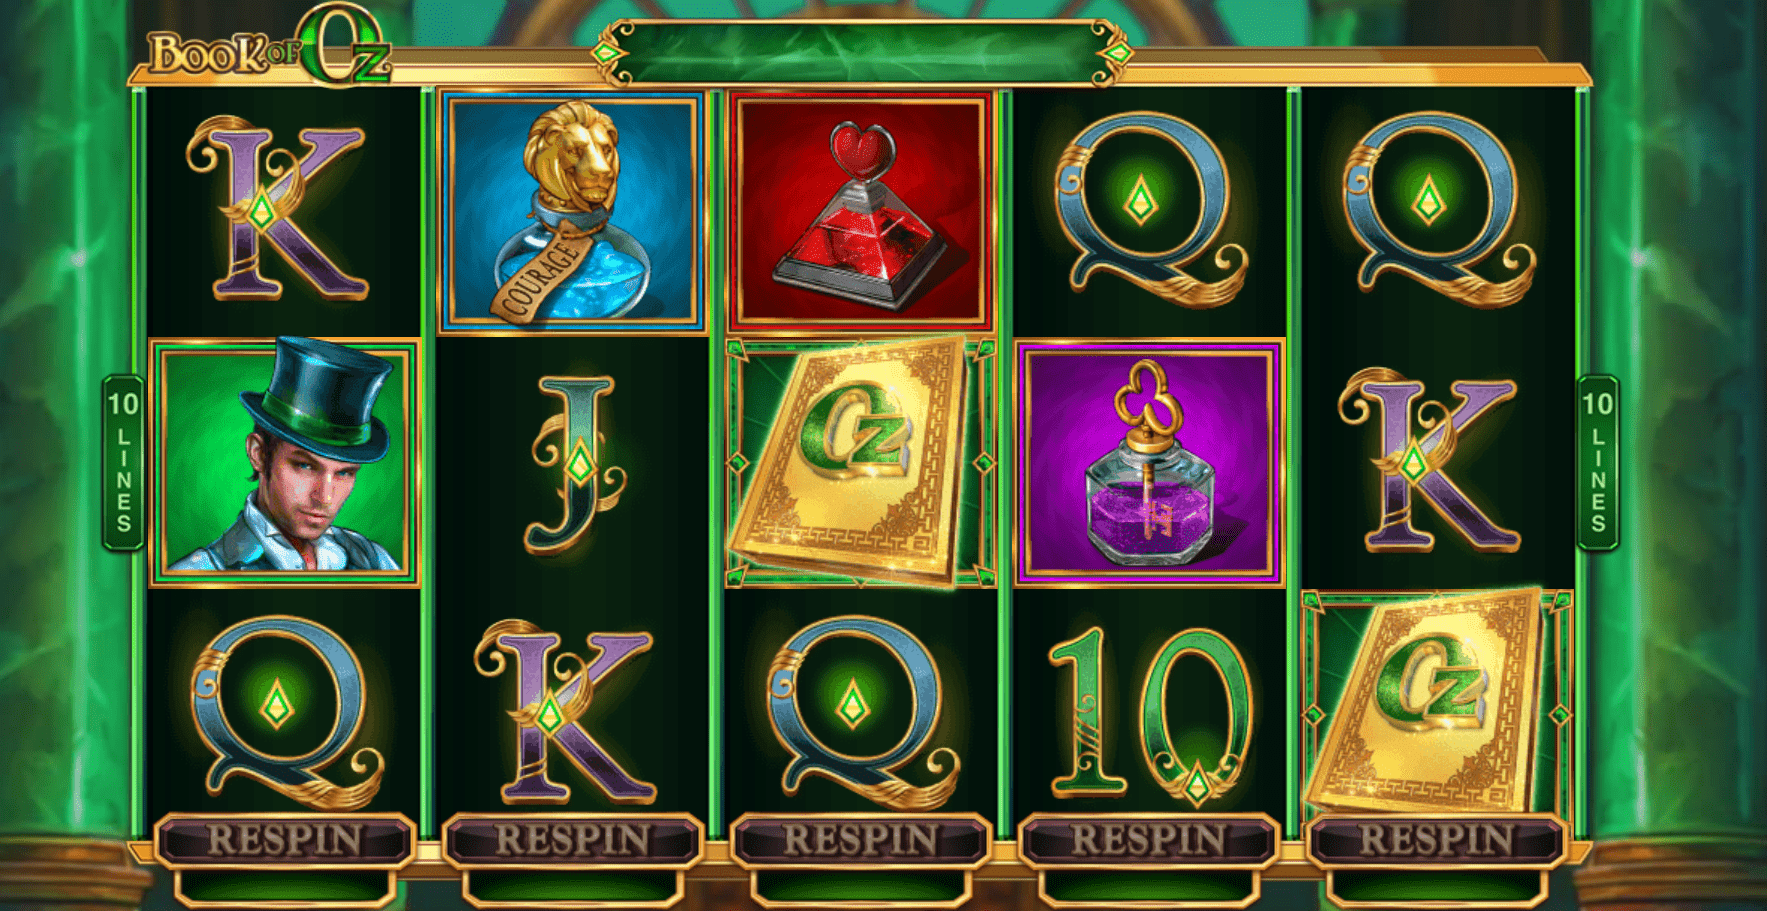 Book of Oz play slot from Microgaming